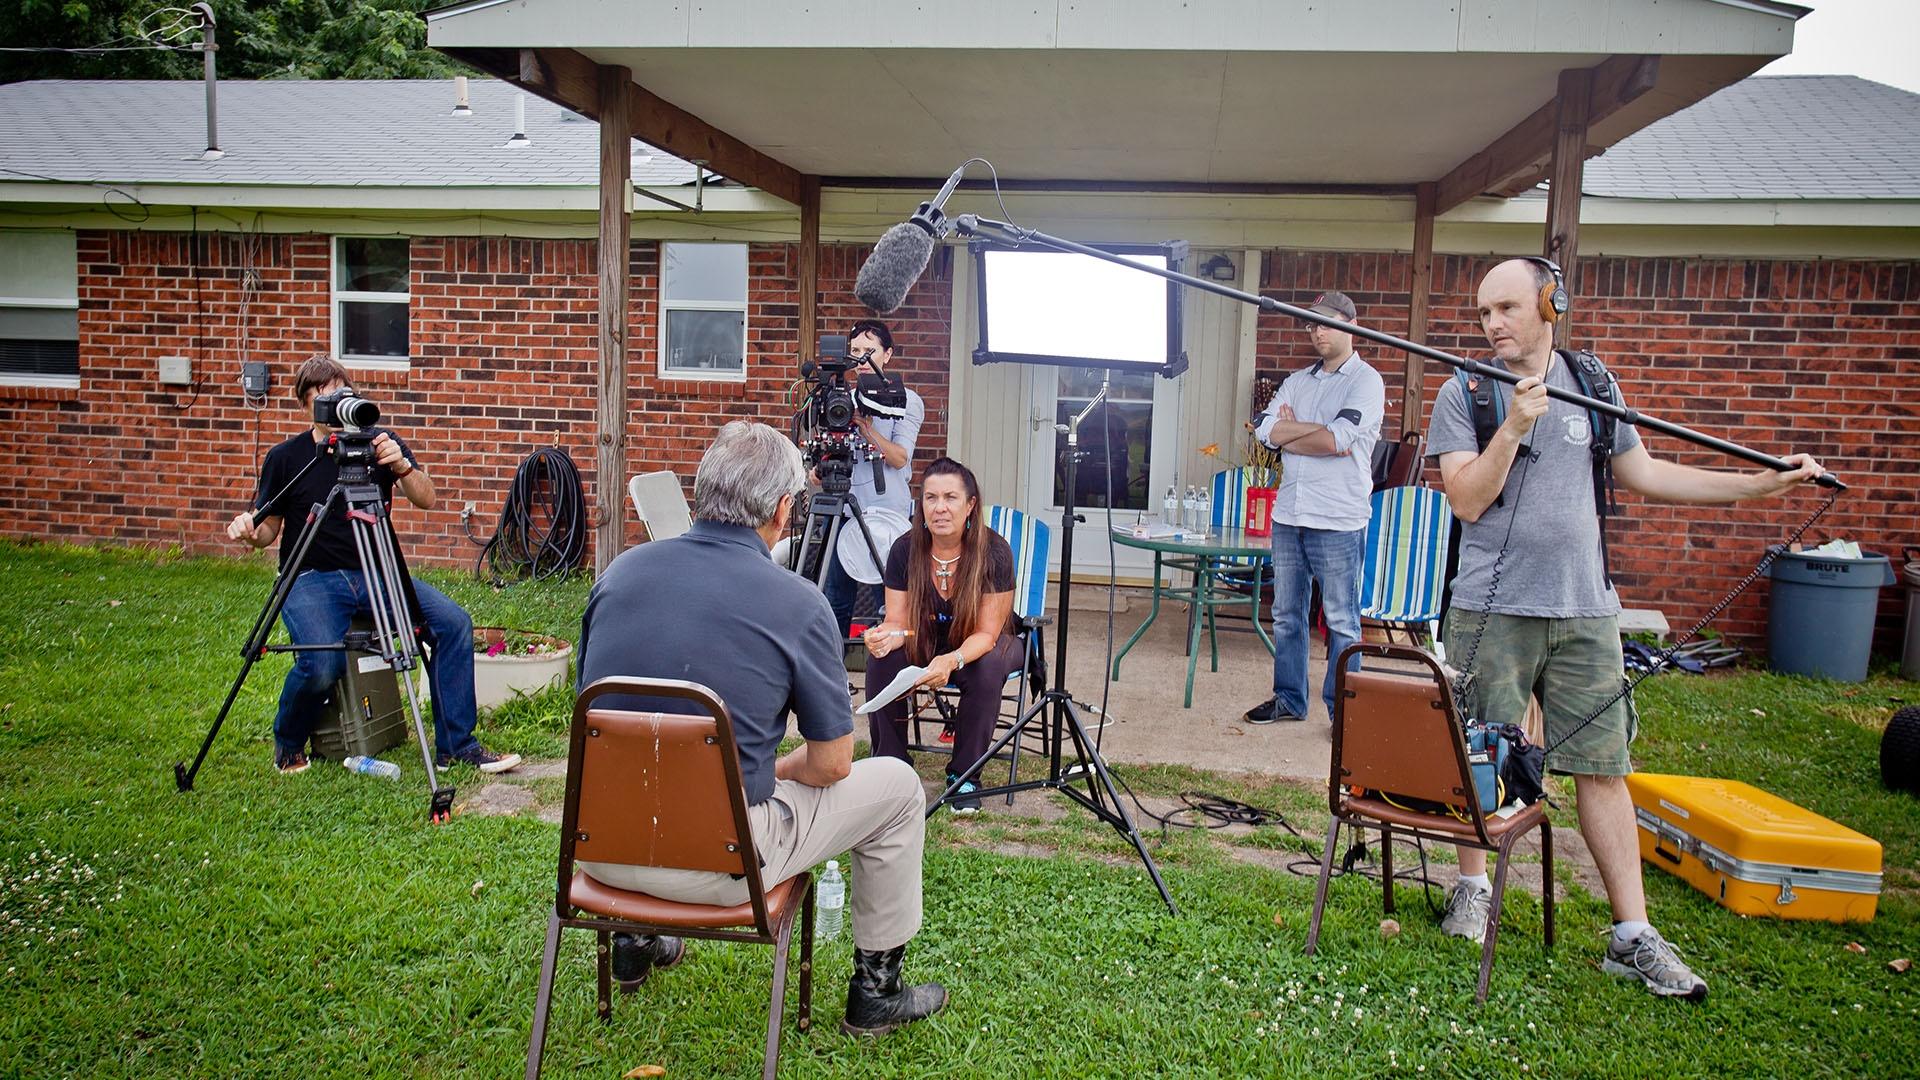 On location in Oklahoma, the "Mankiller" documentary crew interviews Chad Smith.